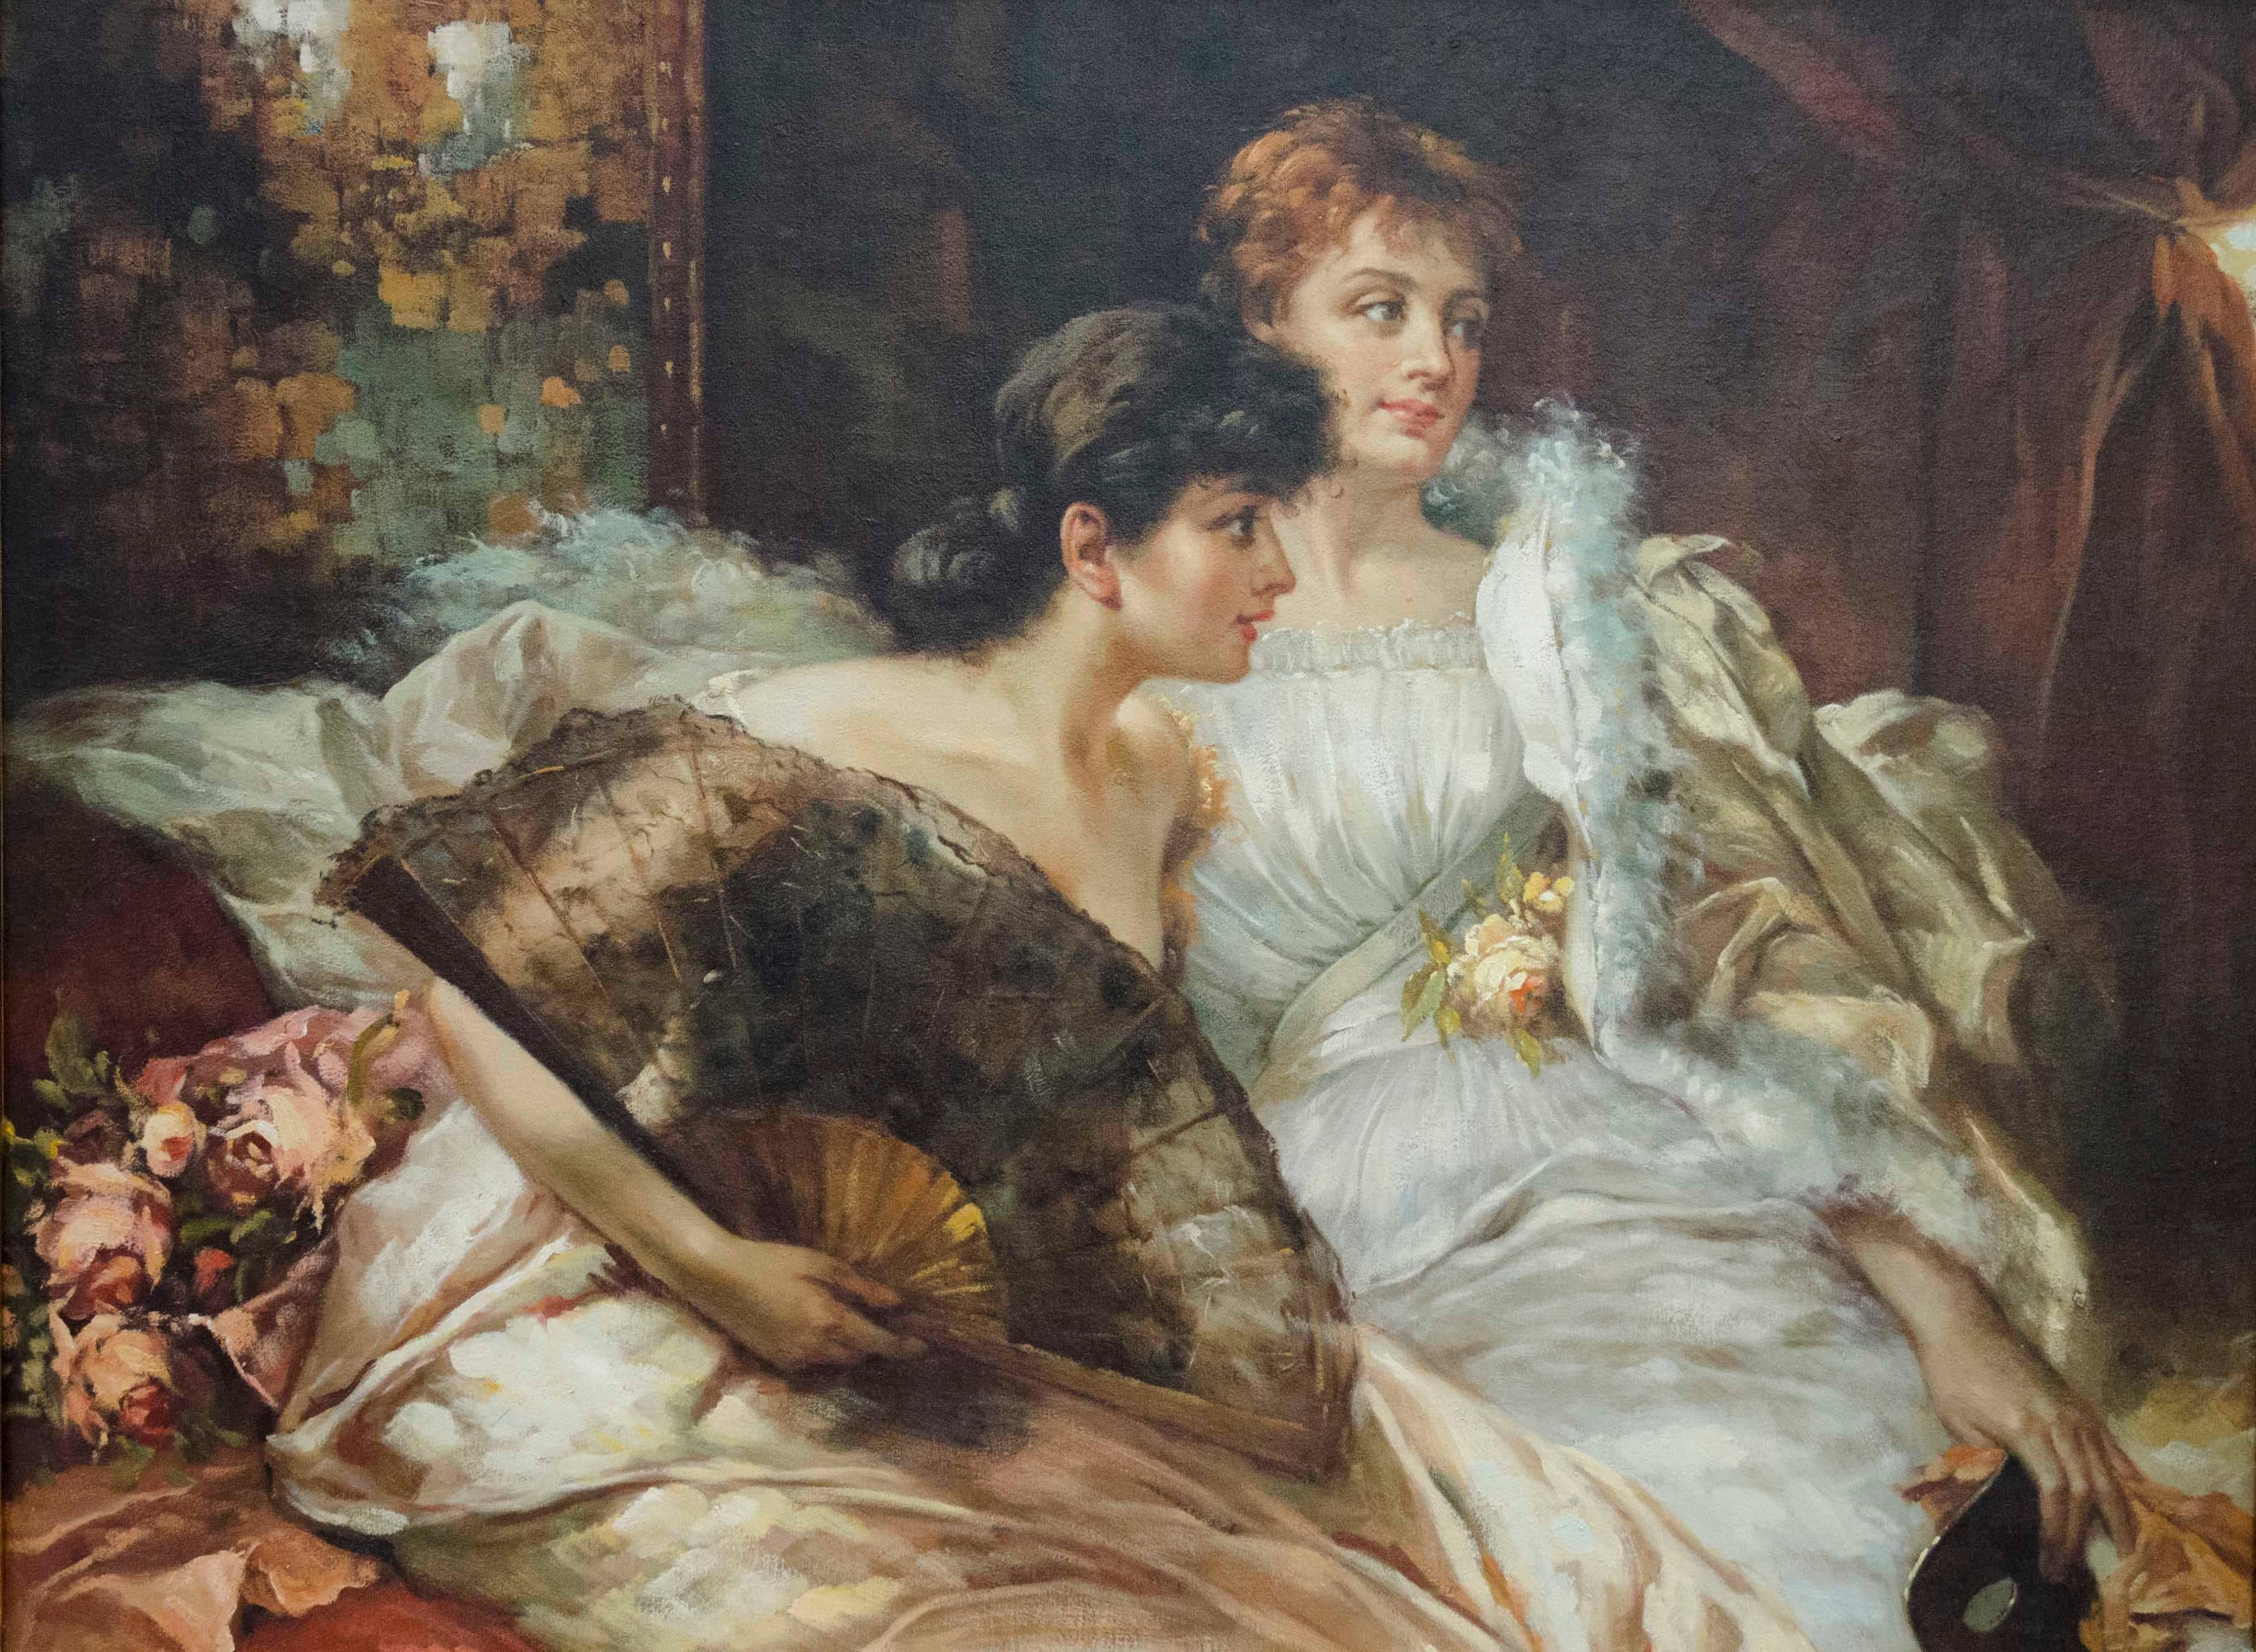 Lovely scene of a pair of well dressed ladies sitting and chatting at what seems to be a masked ball. The lady with brown hair is leaning forward giving the impression to talk to someone outside of the composition. She has nude shoulders and covers